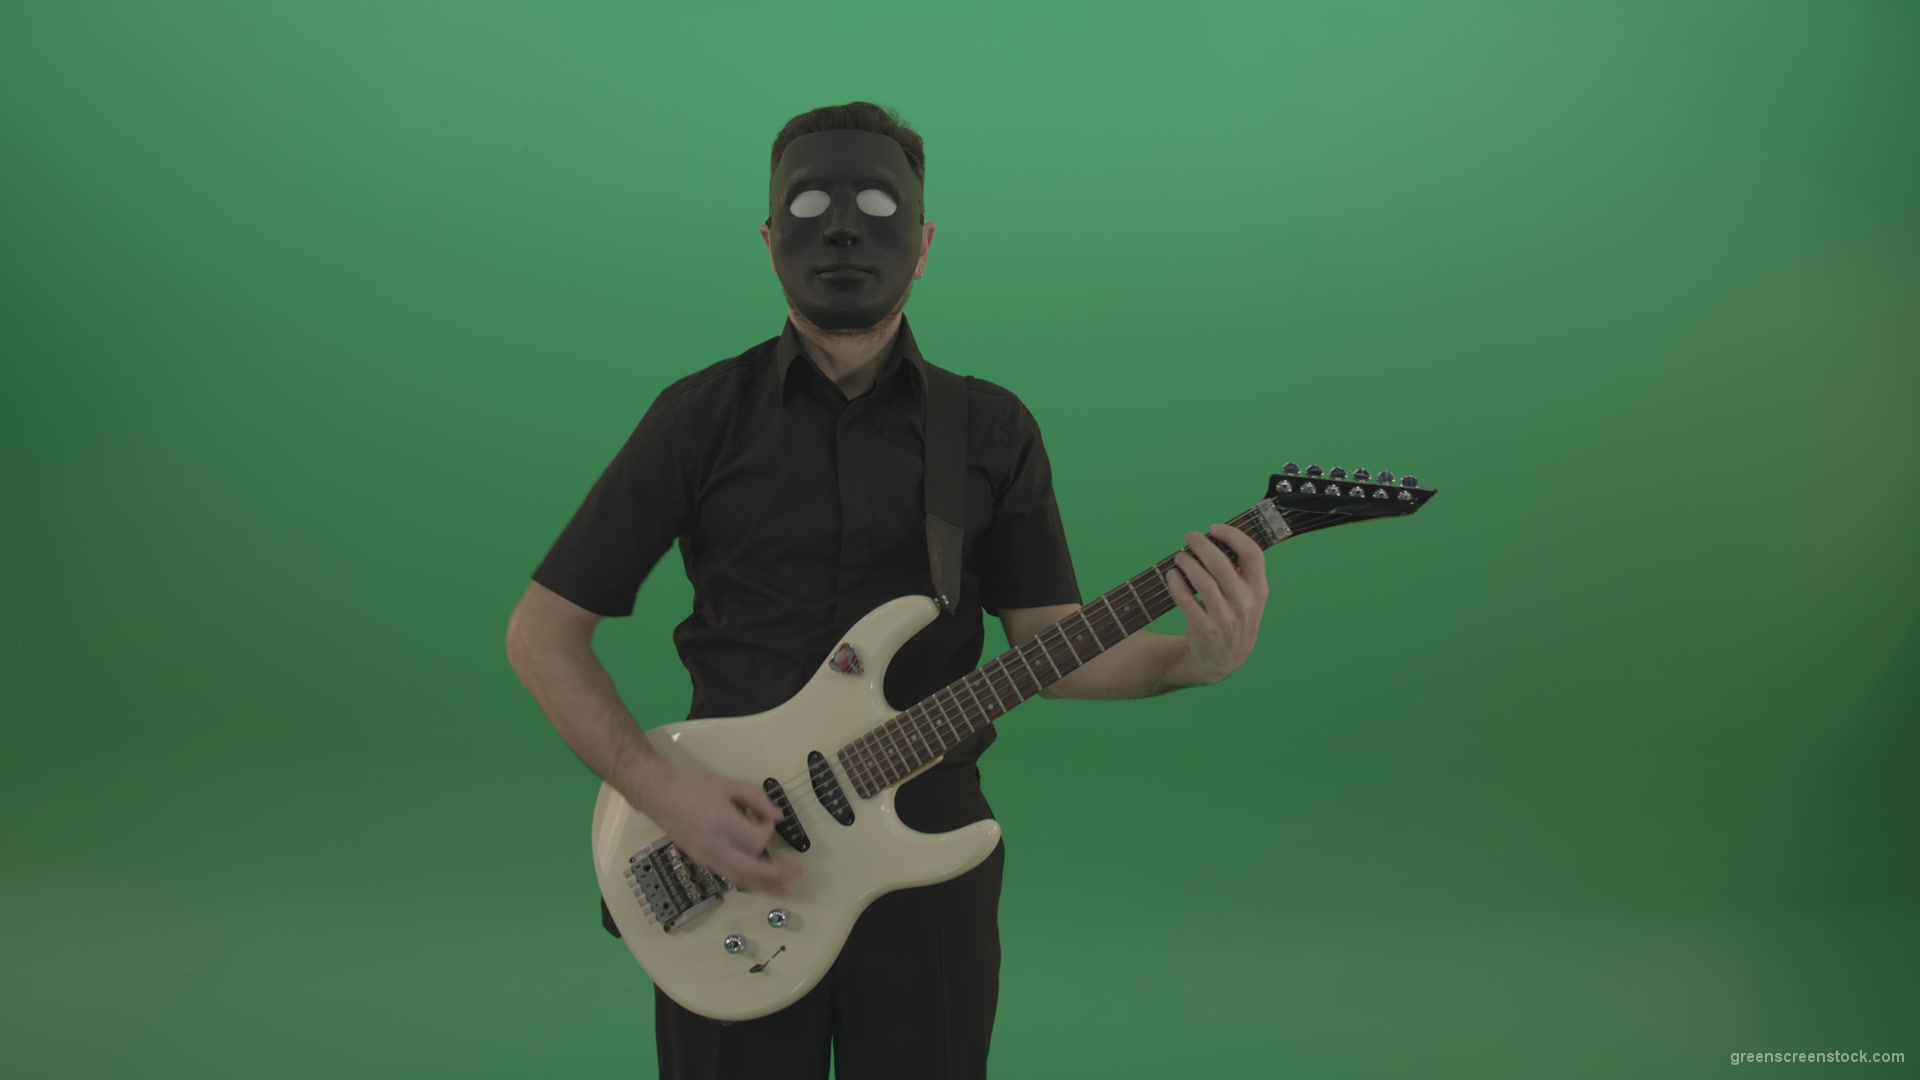 Hard-rock-guitarist-man-playing-white-guitar-in-black-mask-isolated-on-green-background_002 Green Screen Stock